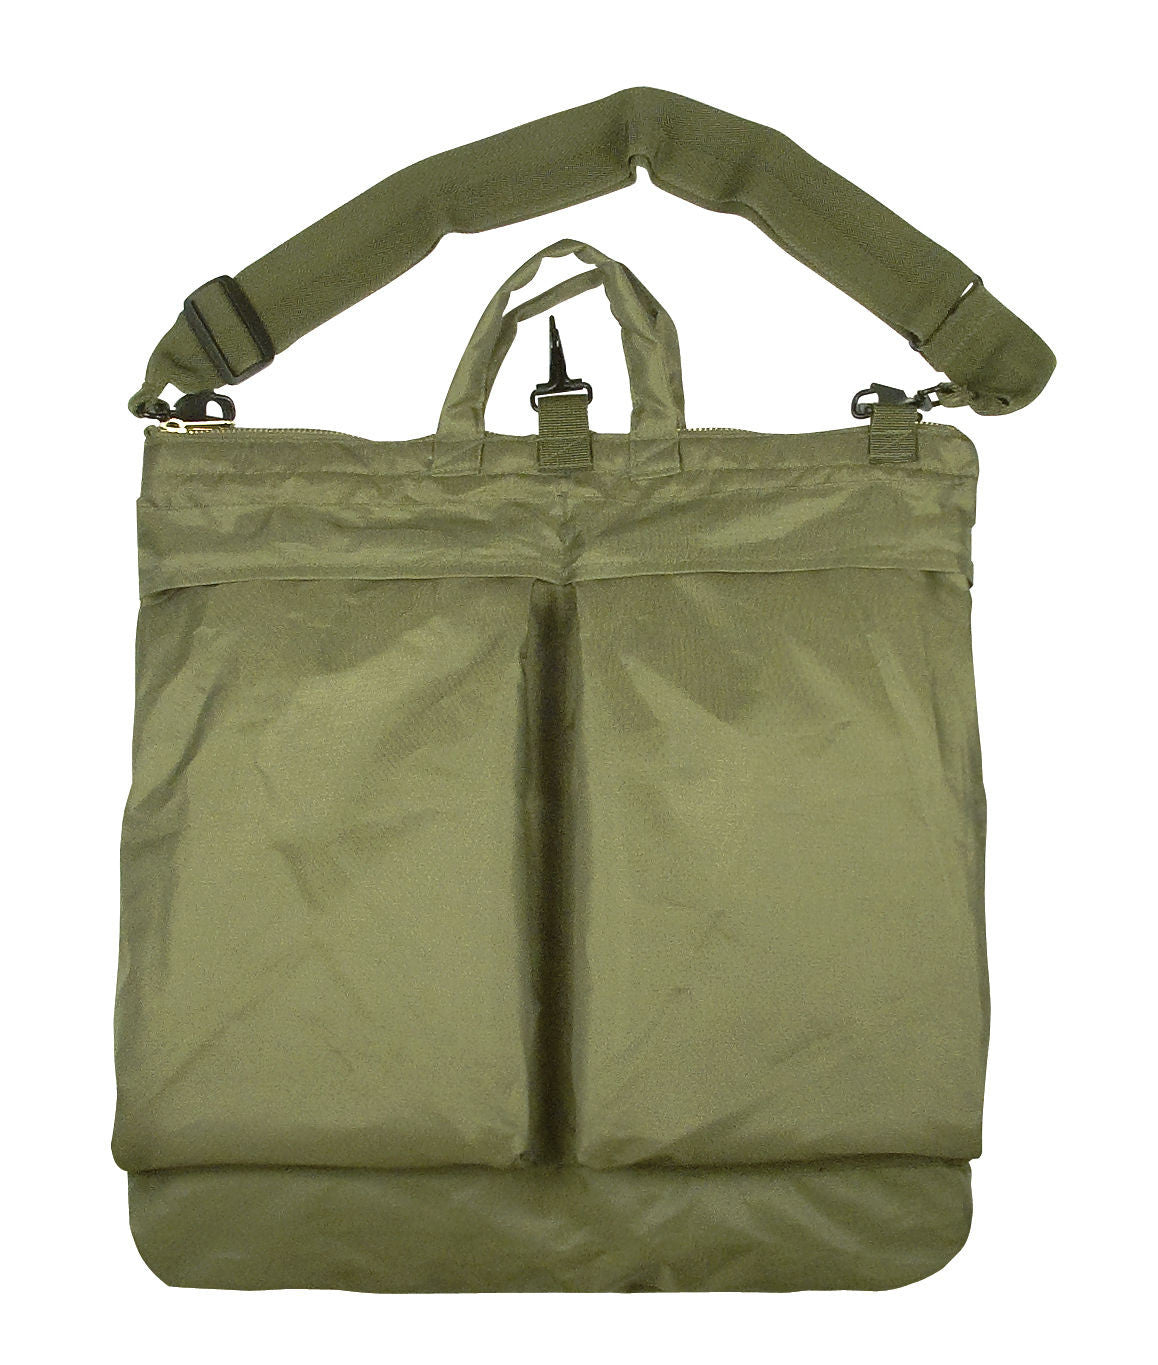 Olive Drab With Strap